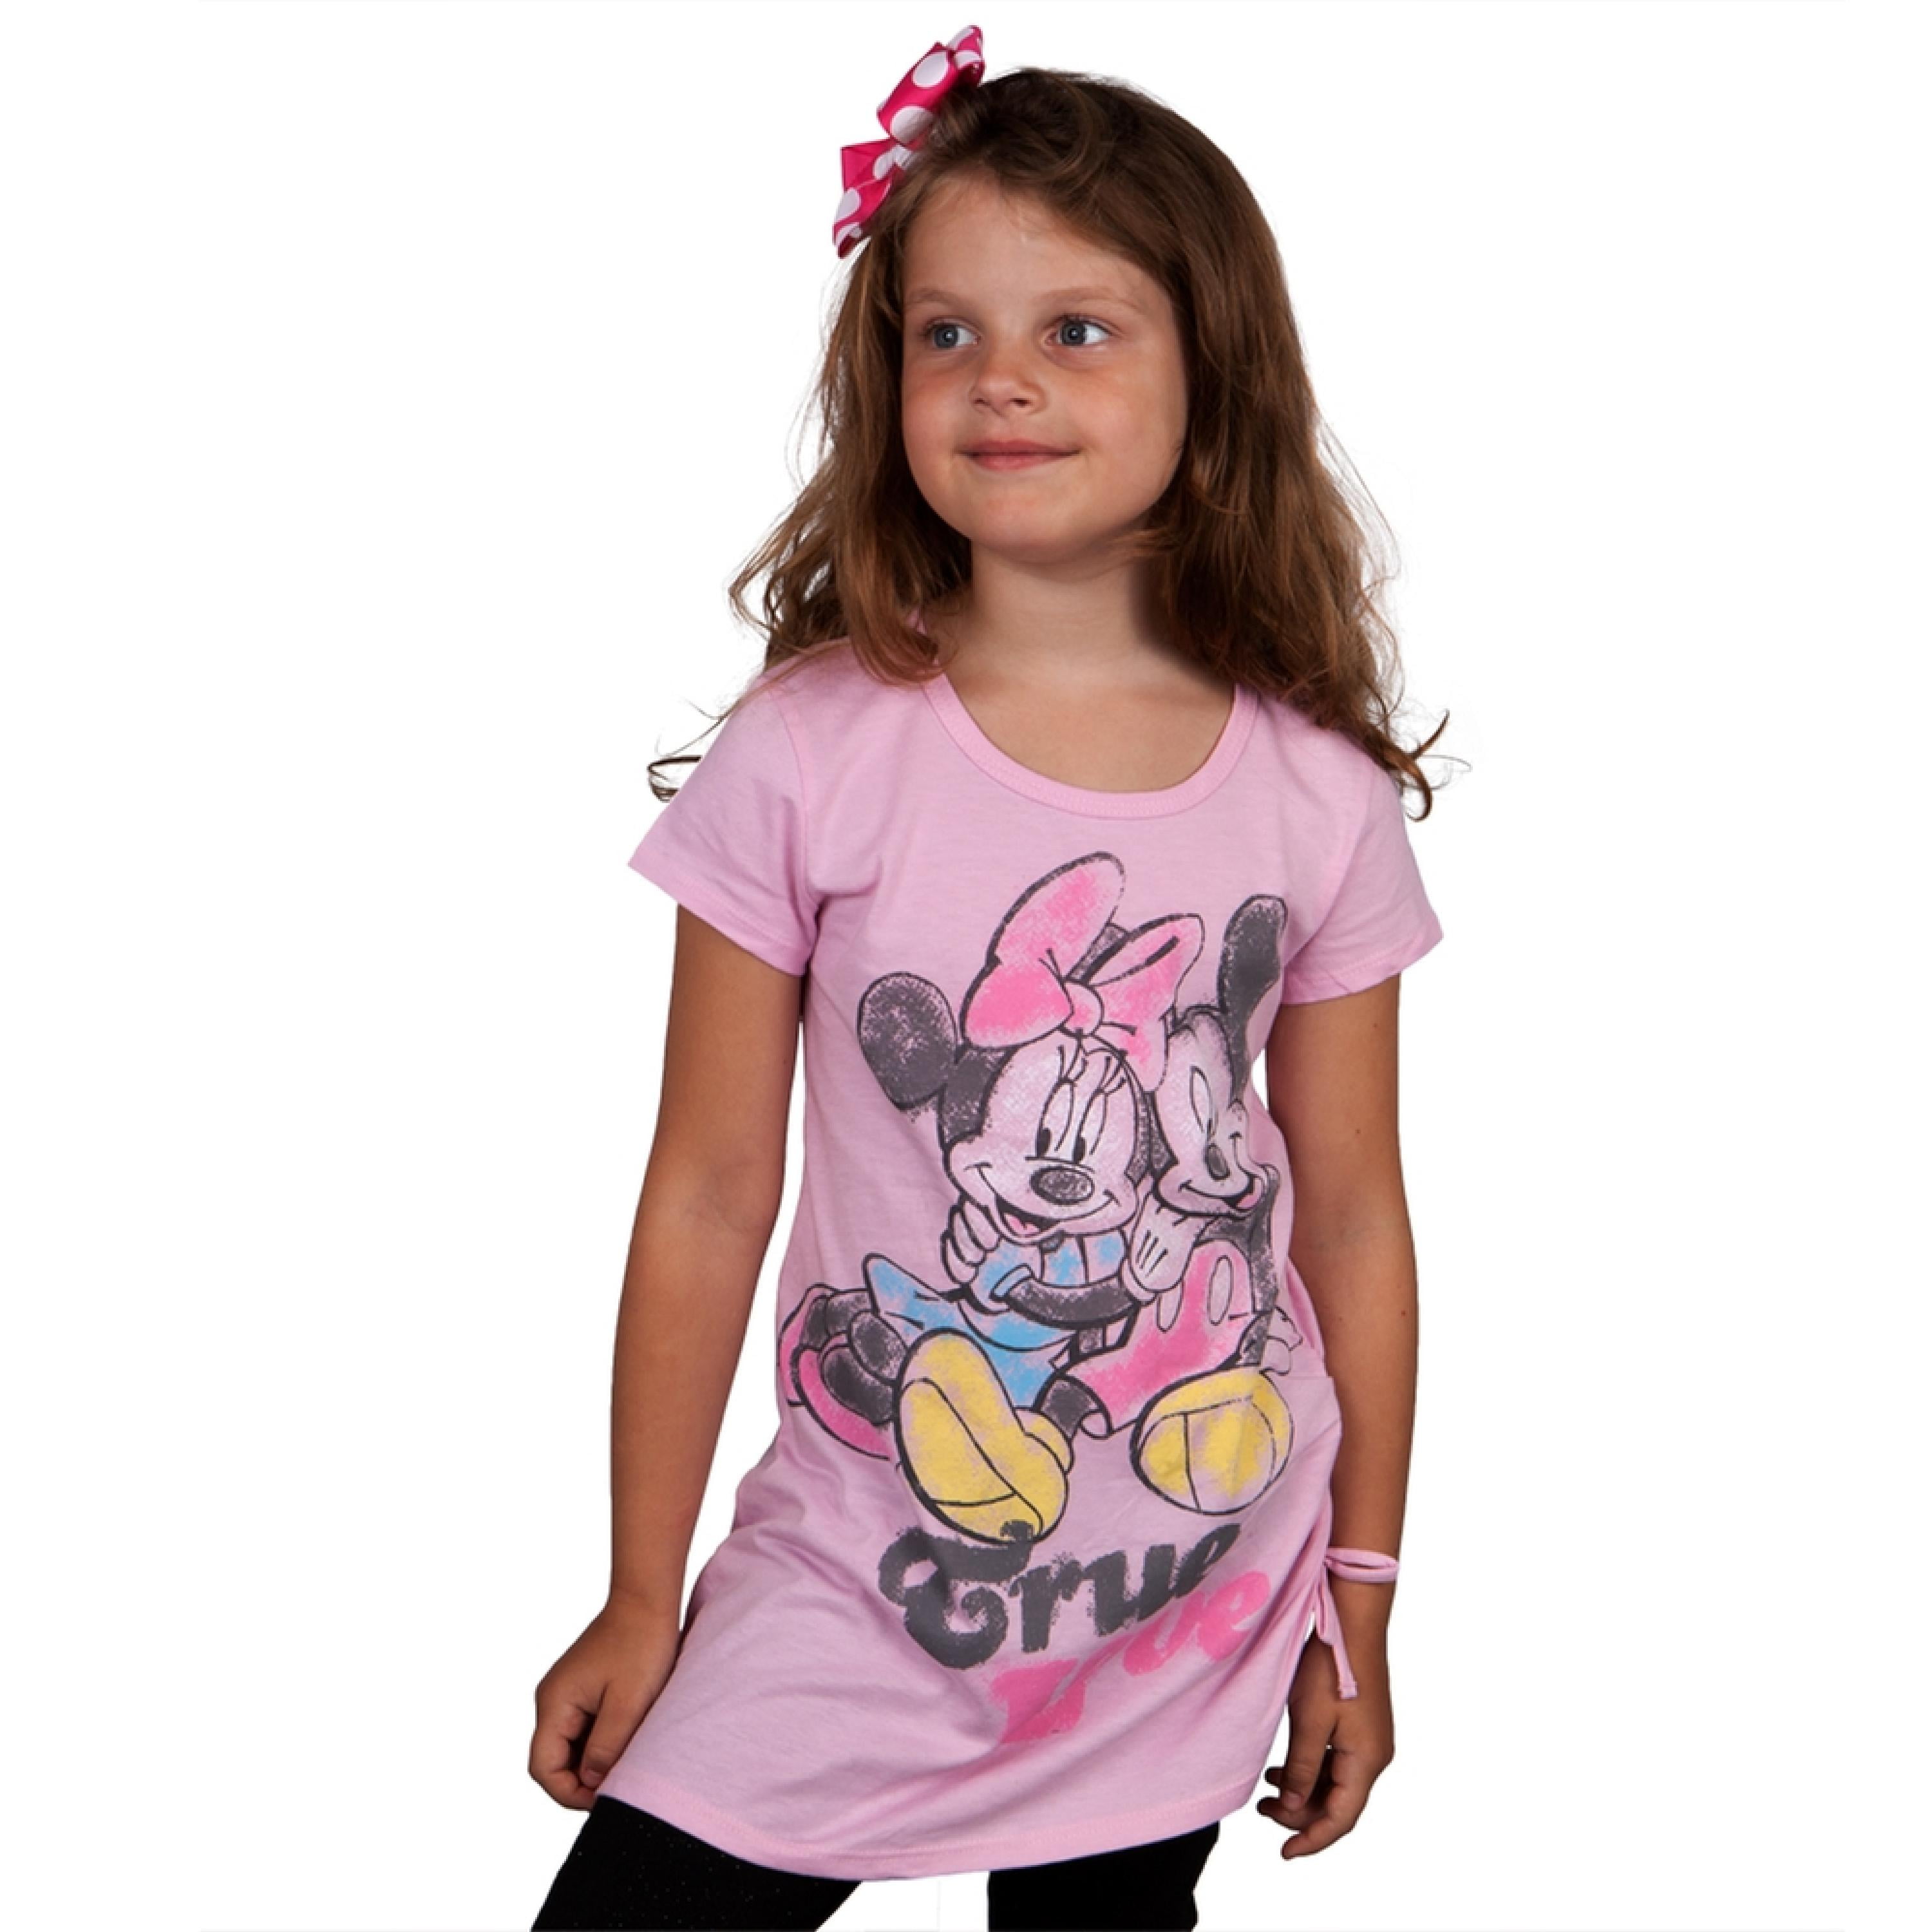 Minnie Mouse Girl White Cotton Top T-Shirt Size 6-12 age 4-12 